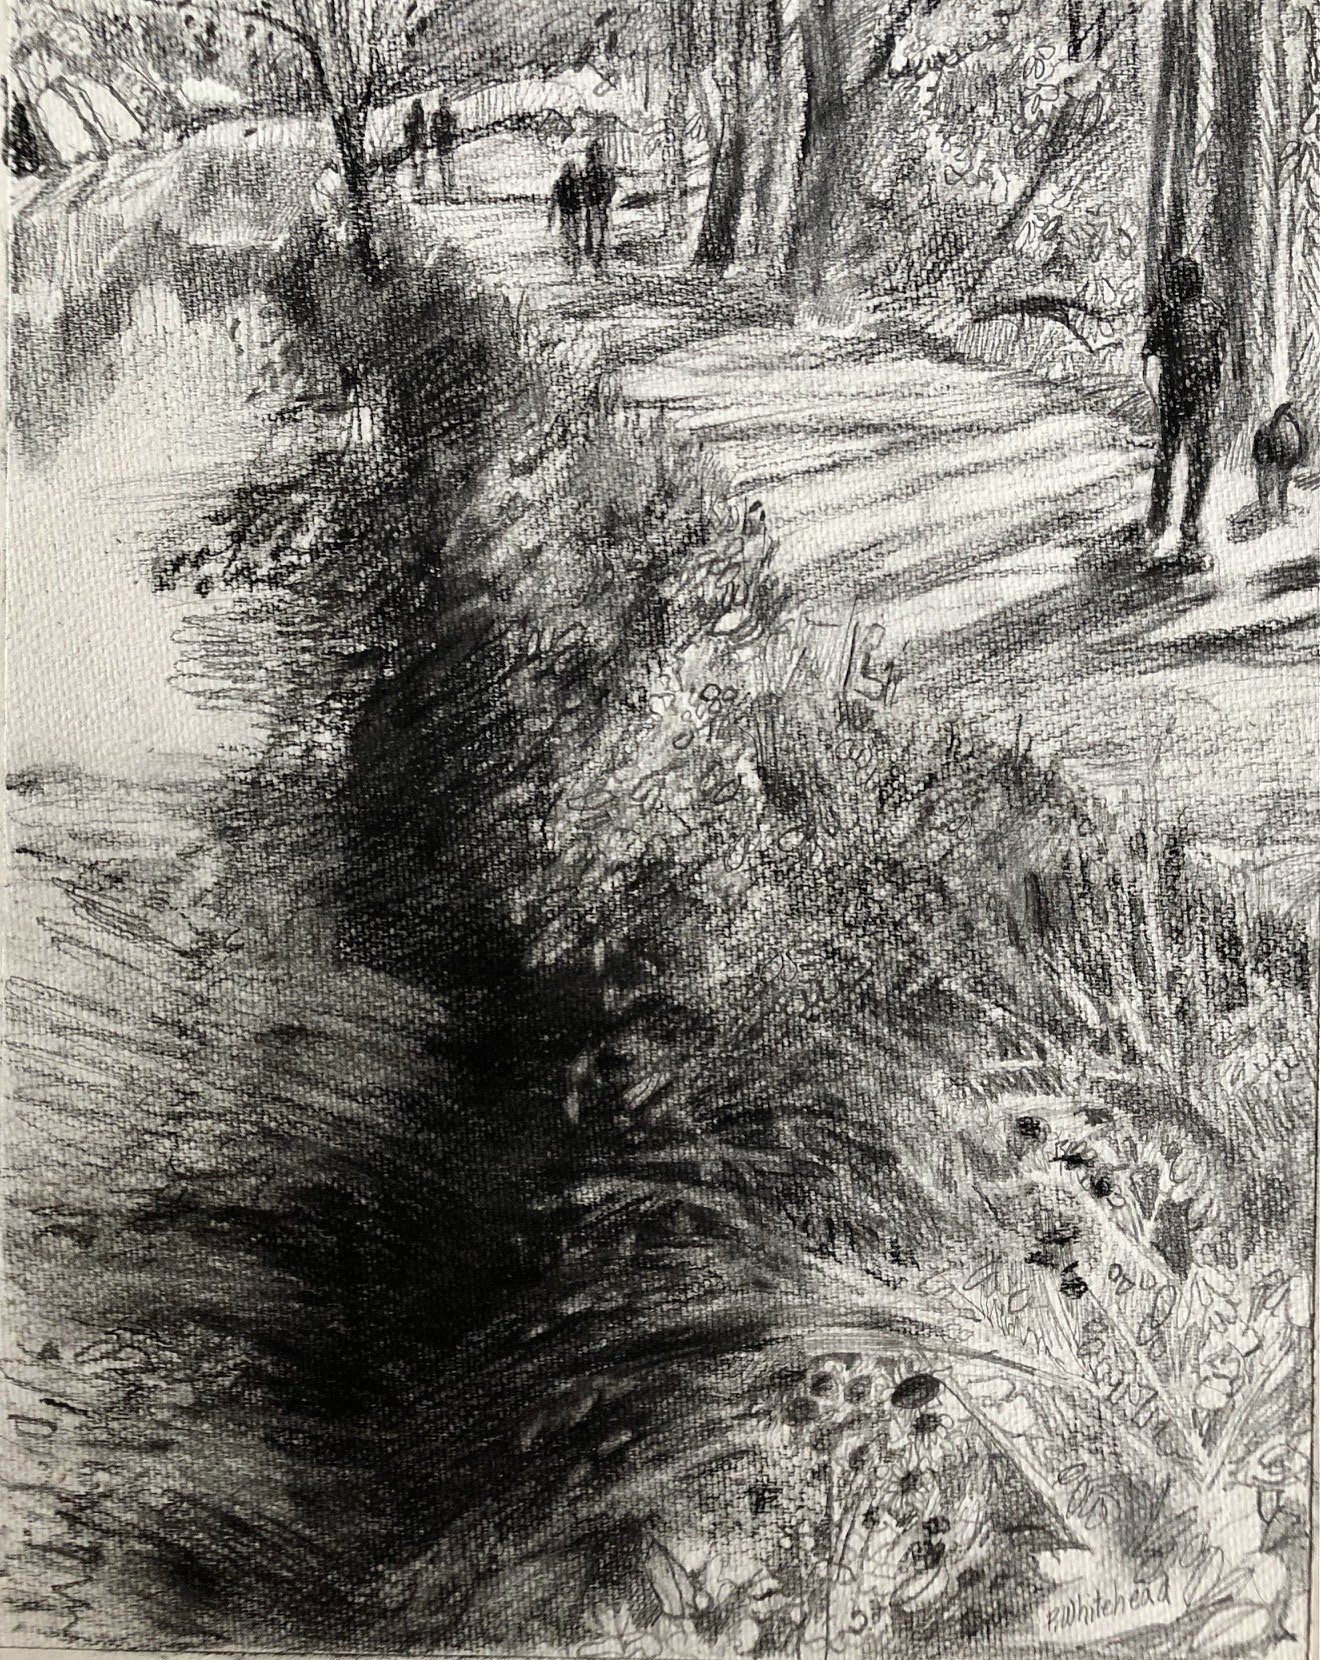 Towpath on the C&O - Amble, 11 x 14", graphite, charcoal, conte